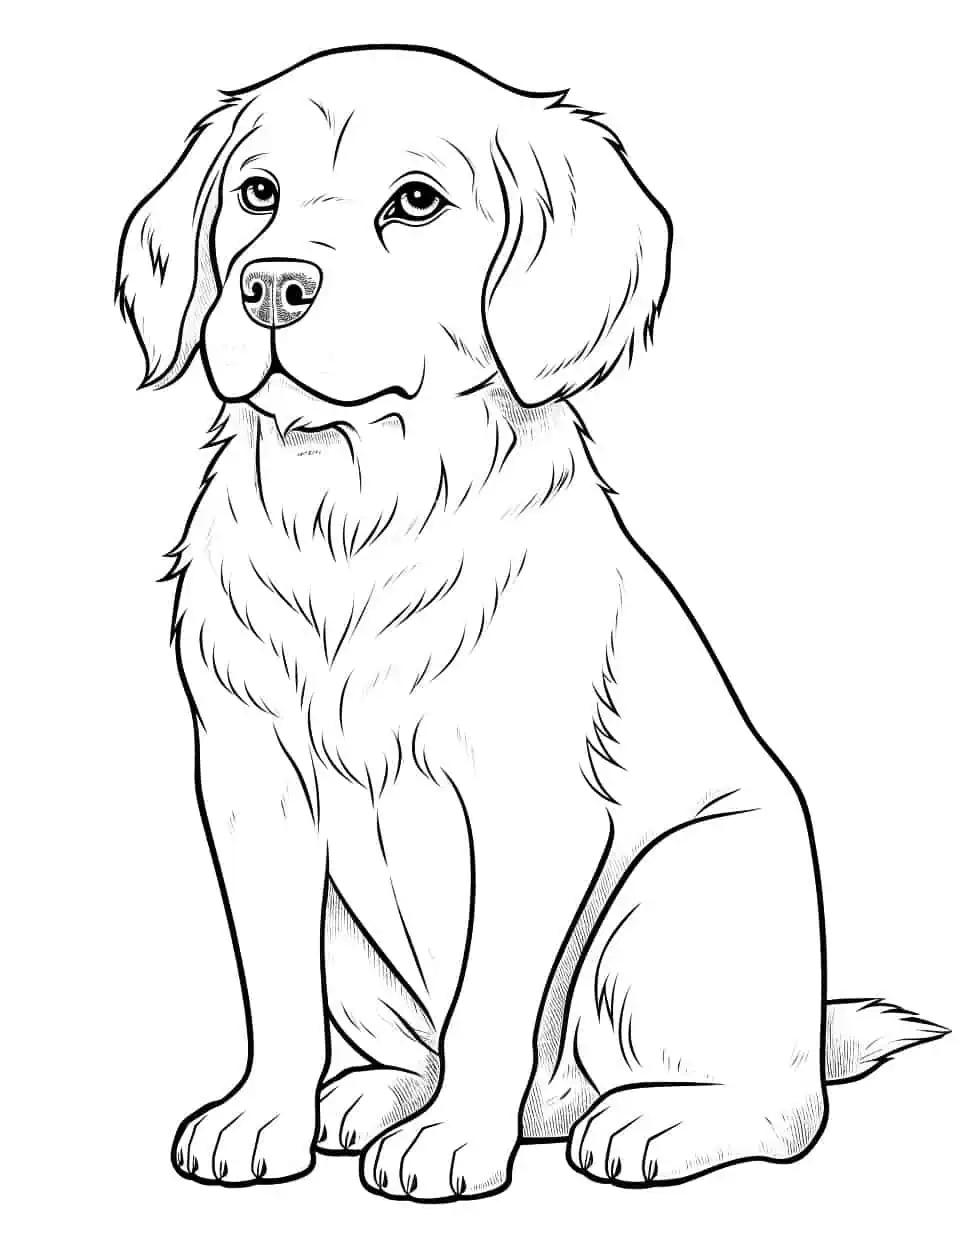 Advanced Dog Drawing Coloring Page - An advanced-level coloring page featuring a detailed, artistic dog drawing.